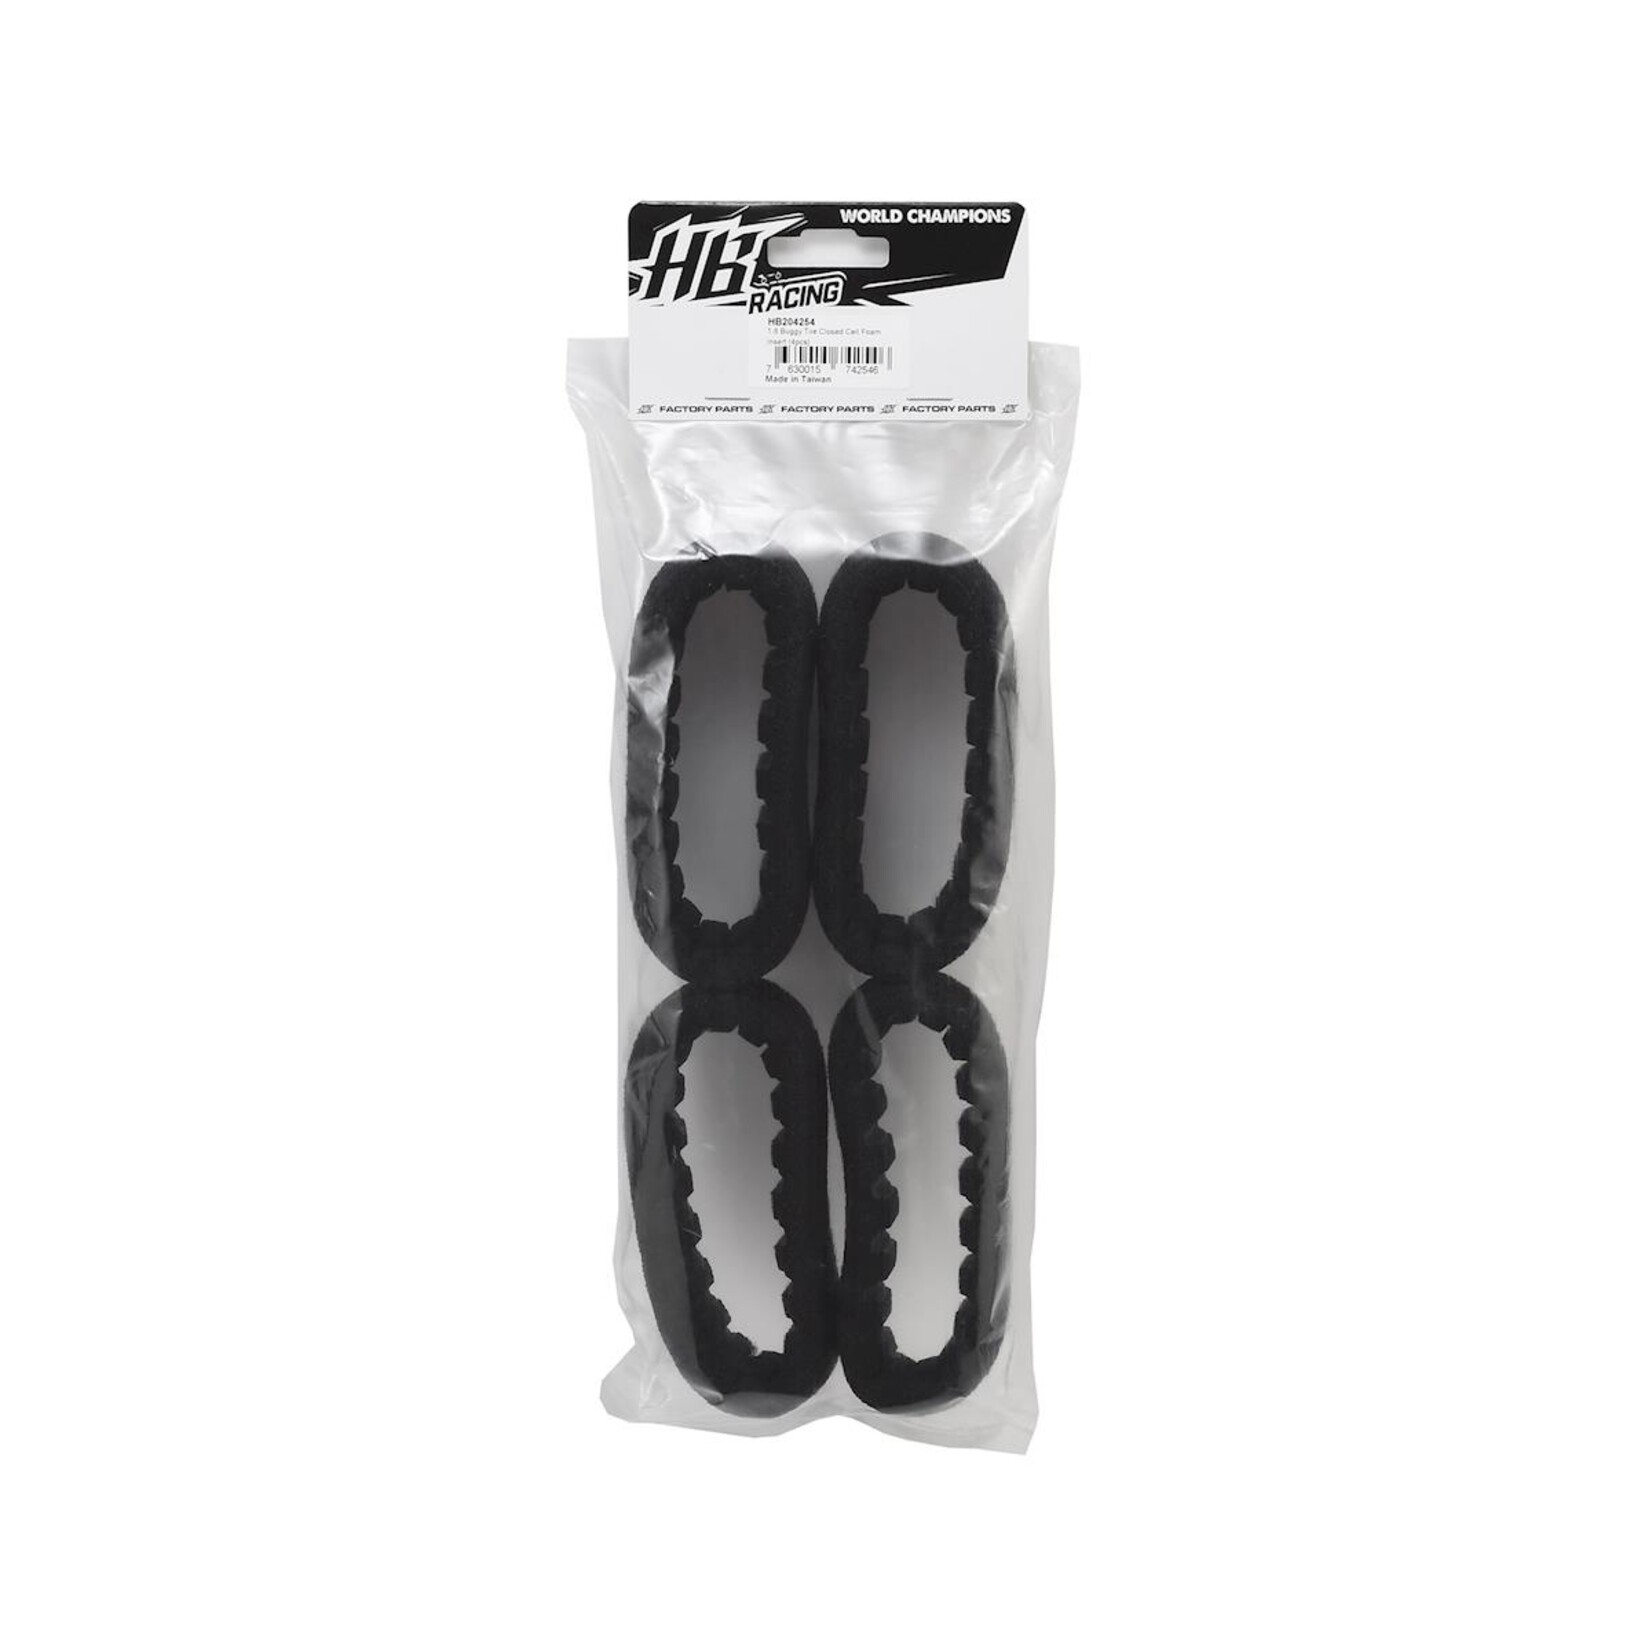 HB Racing HB Racing 1/8 Buggy Closed Cell Foam Insert (Black) (4) #HB204254